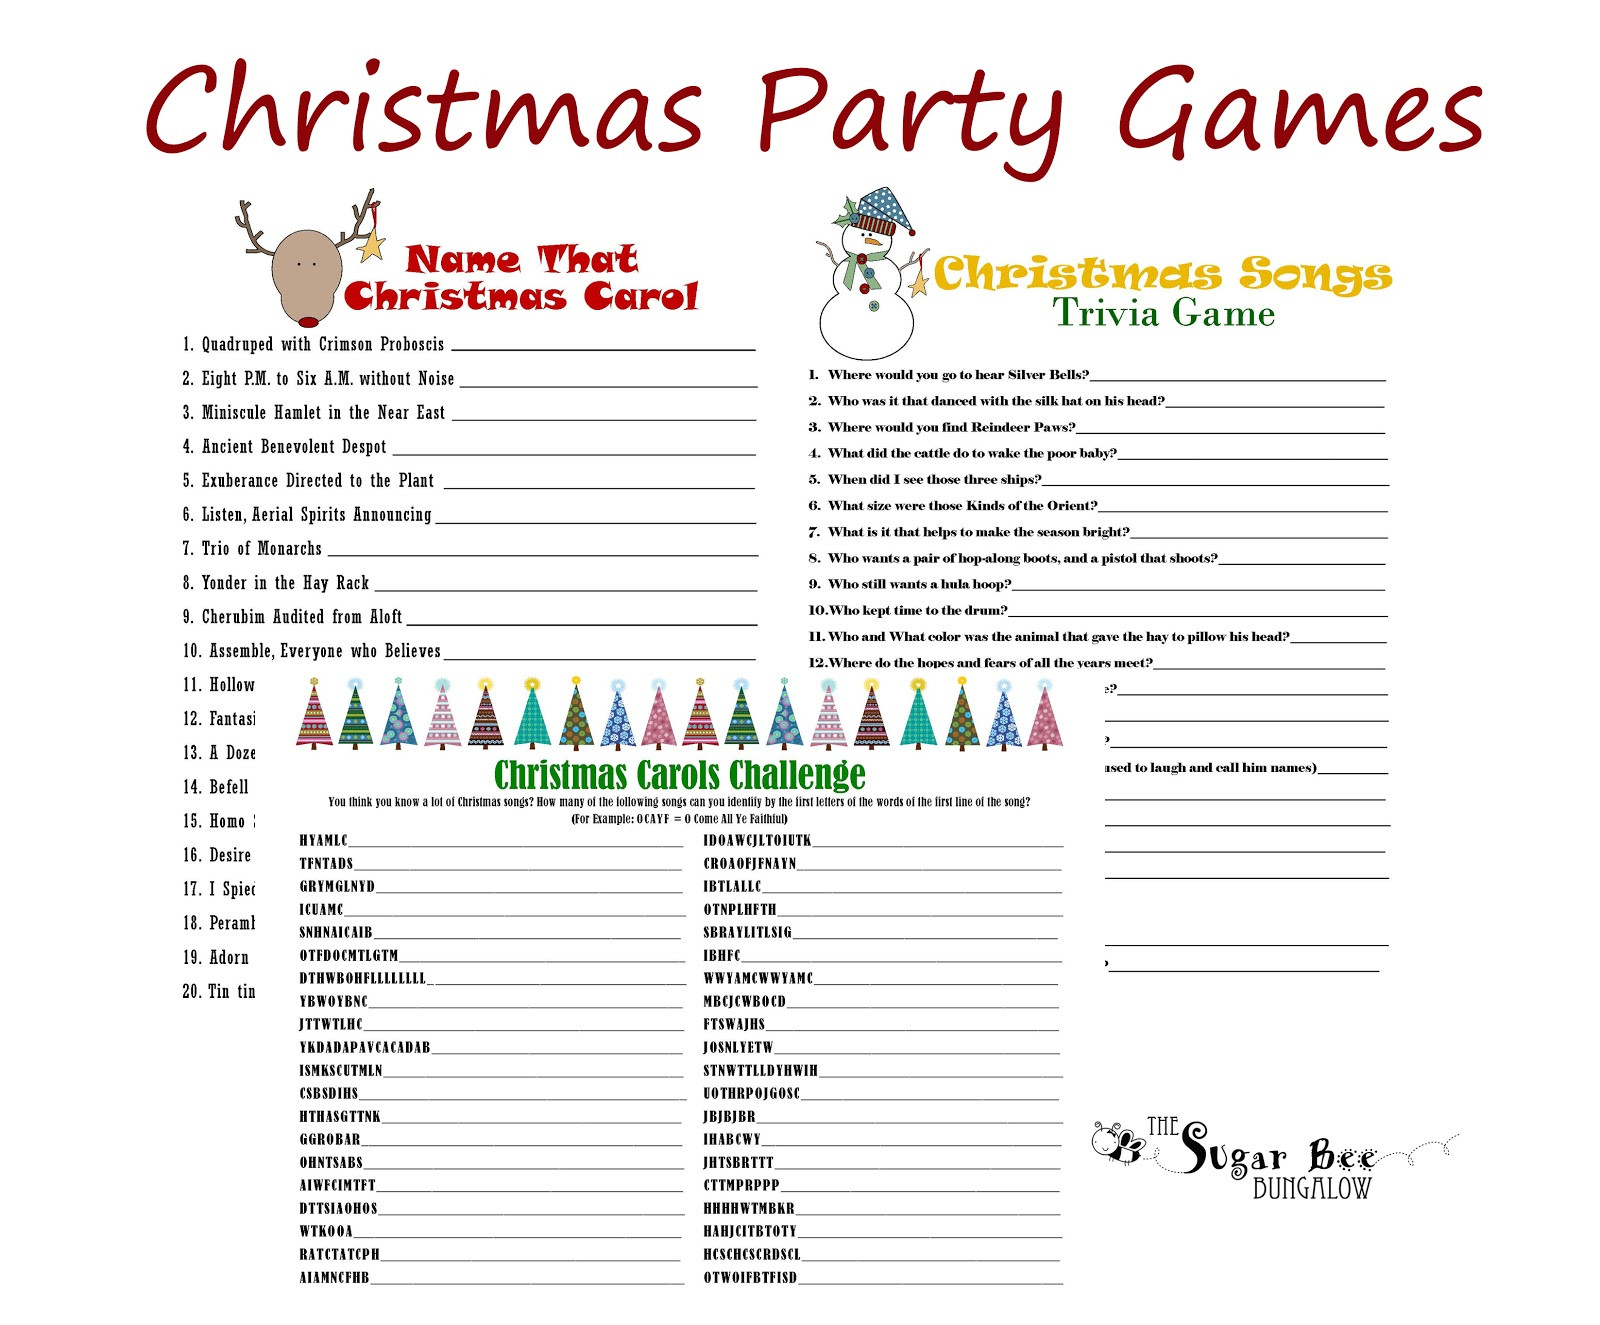 Christmas Party Activity Ideas
 The Sugar Bee Bungalow December 2012